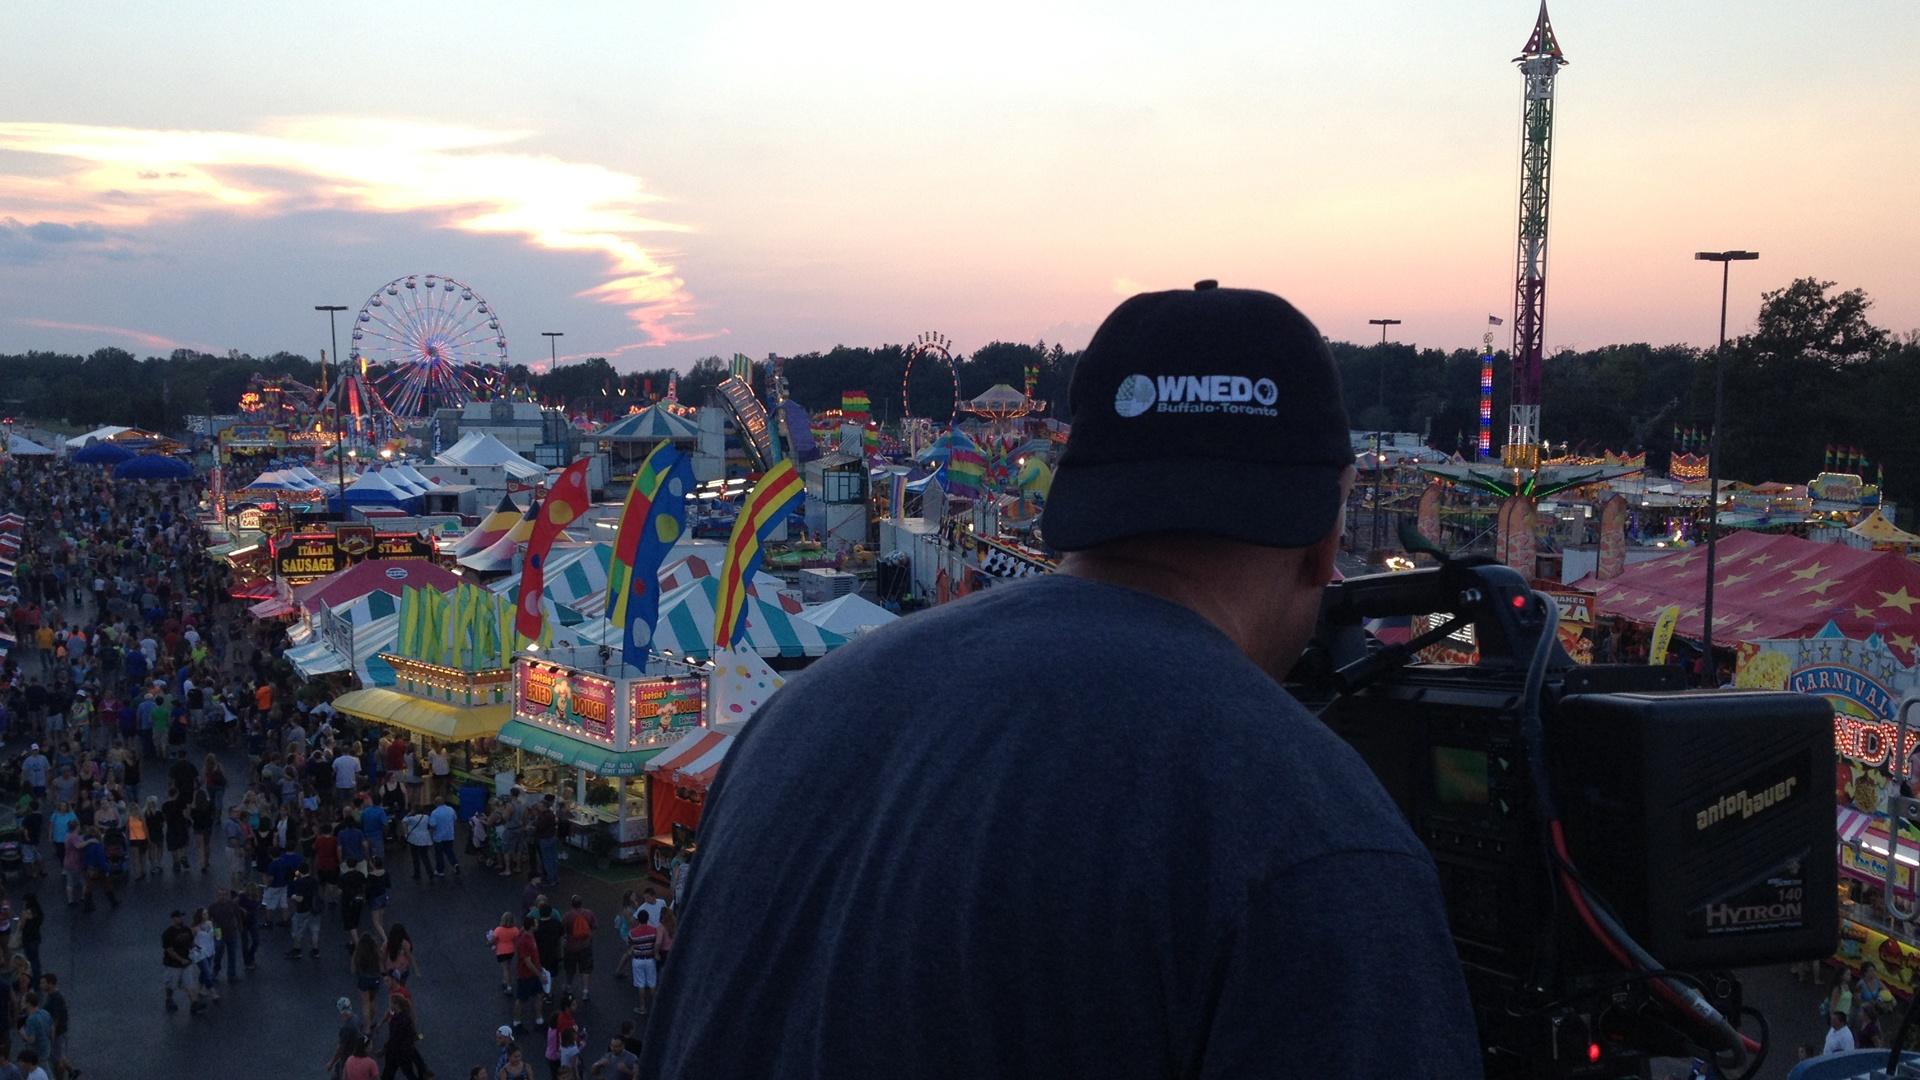 Photographer Jim Zinkowski captures images of the midway at sunset for The Great Erie County Fair